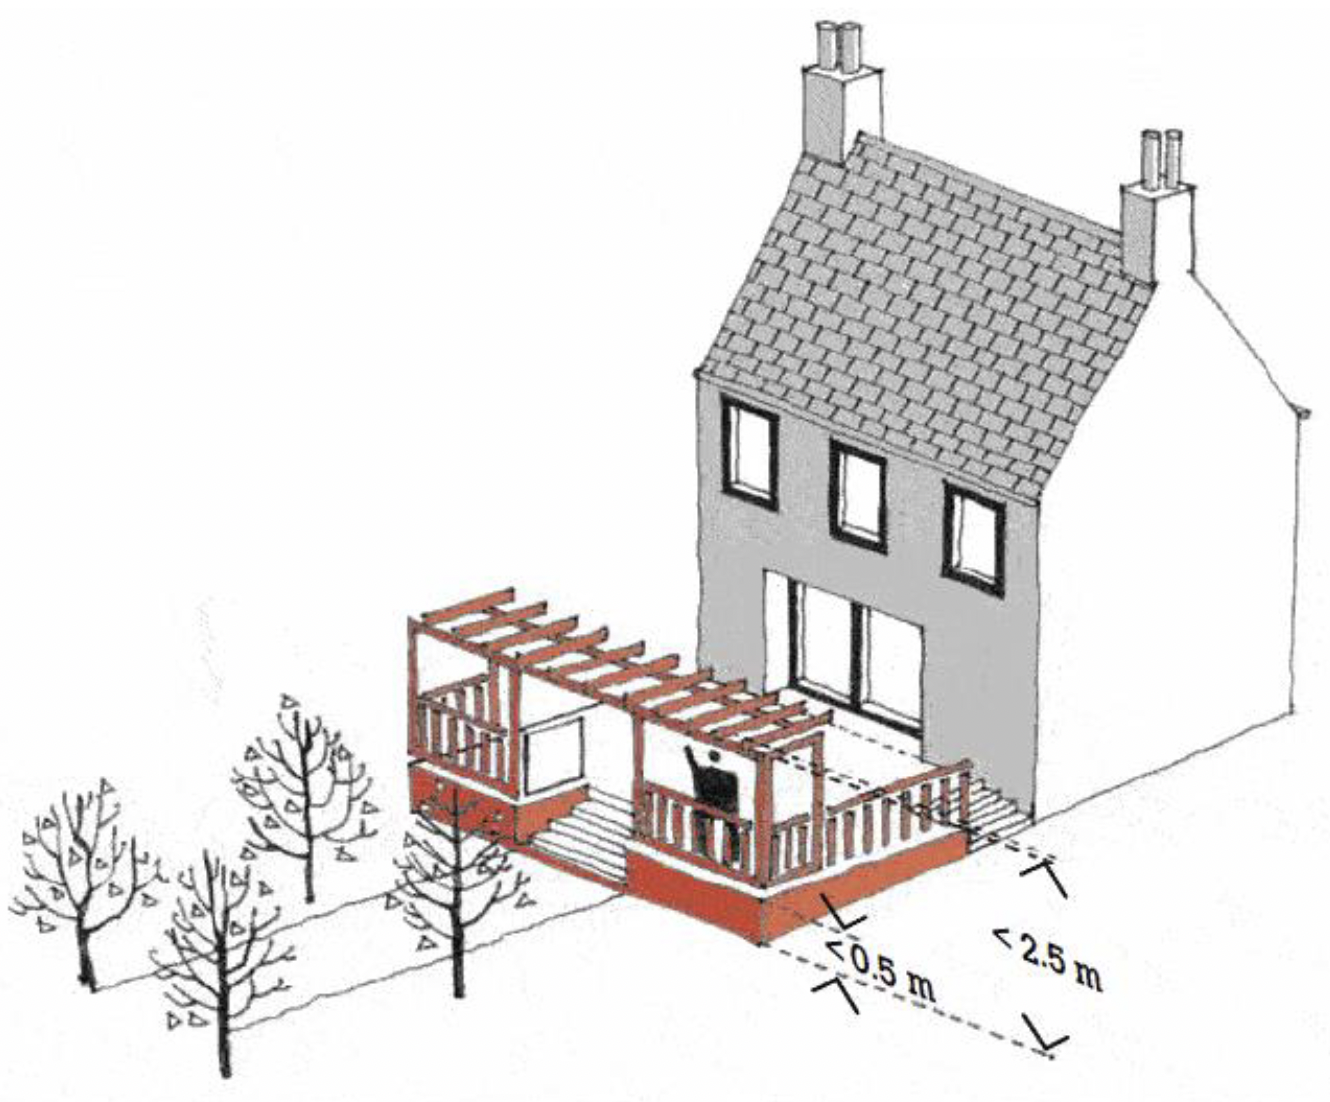 Illustration showing the limitations for a deck or raised platform at the rear of a dwellinghouse